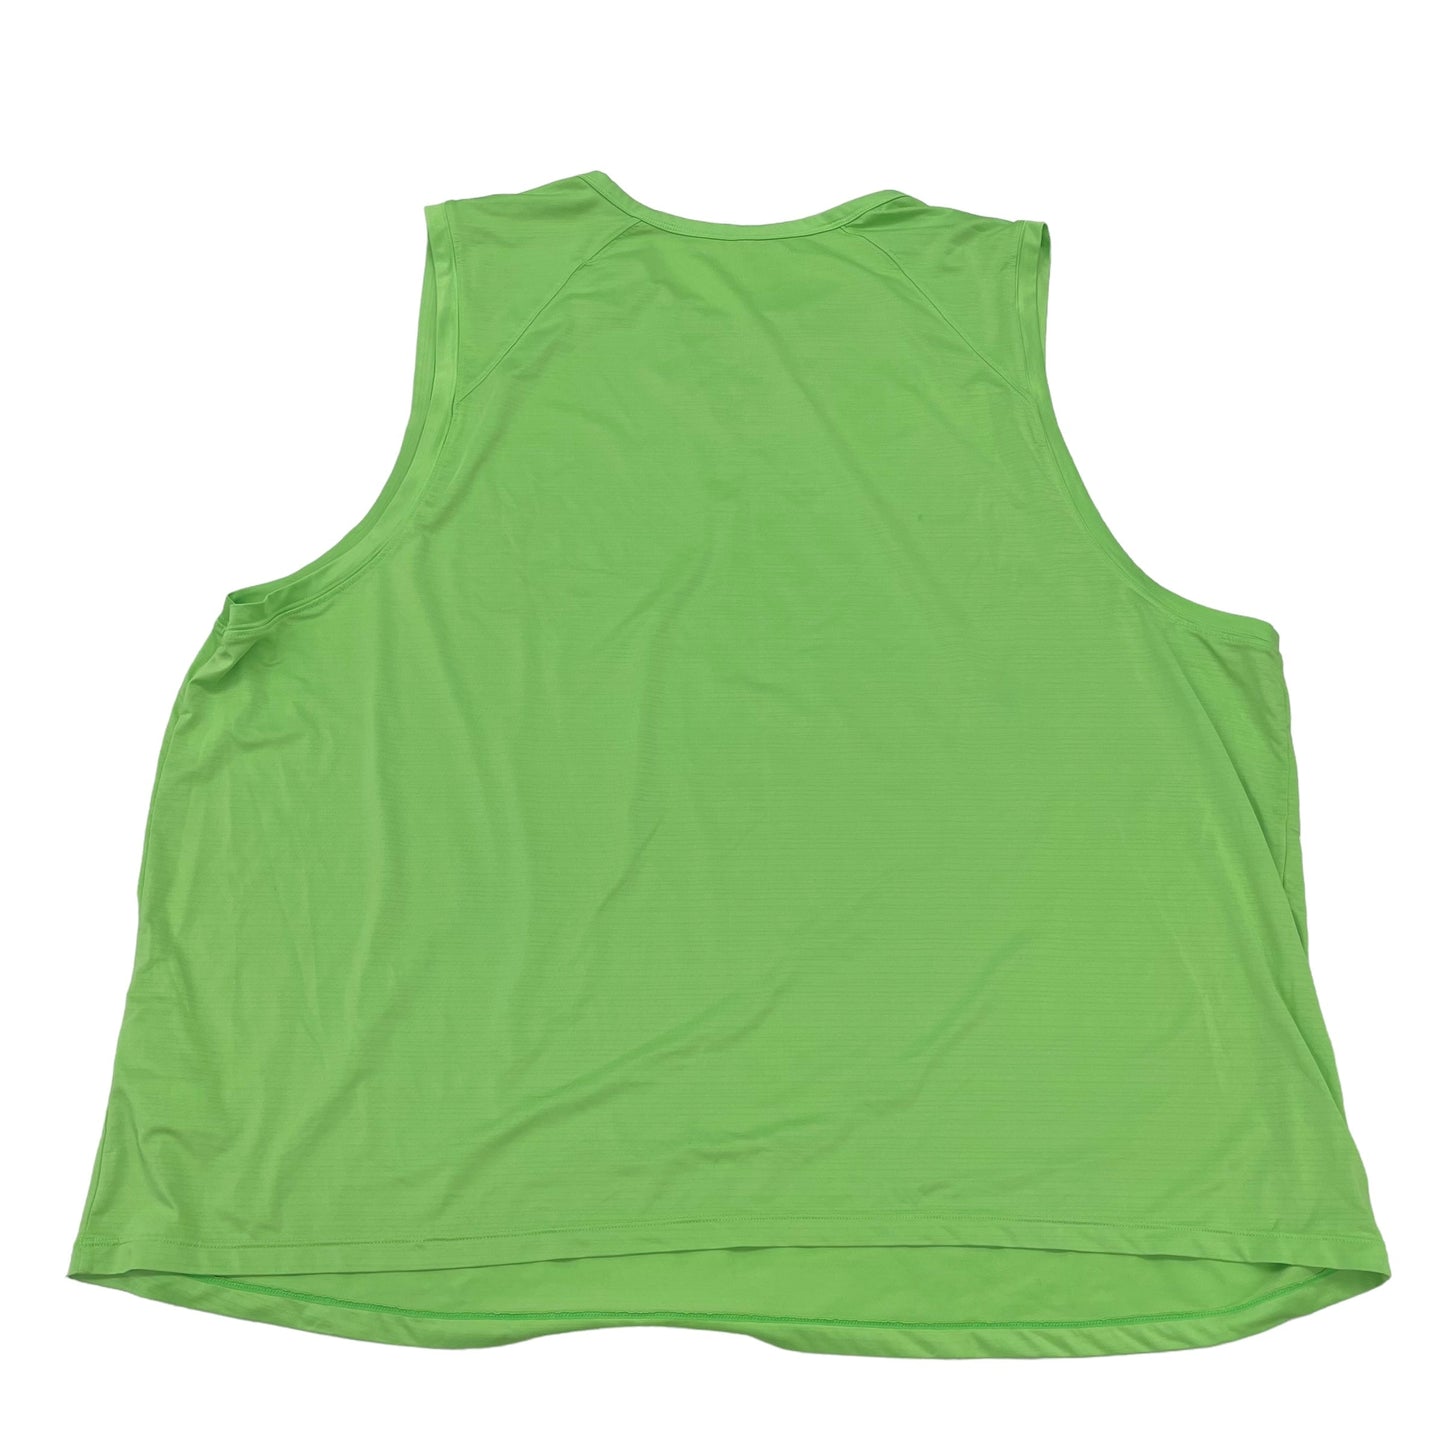 GREEN FABLETICS ATHLETIC TANK TOP, Size 3X